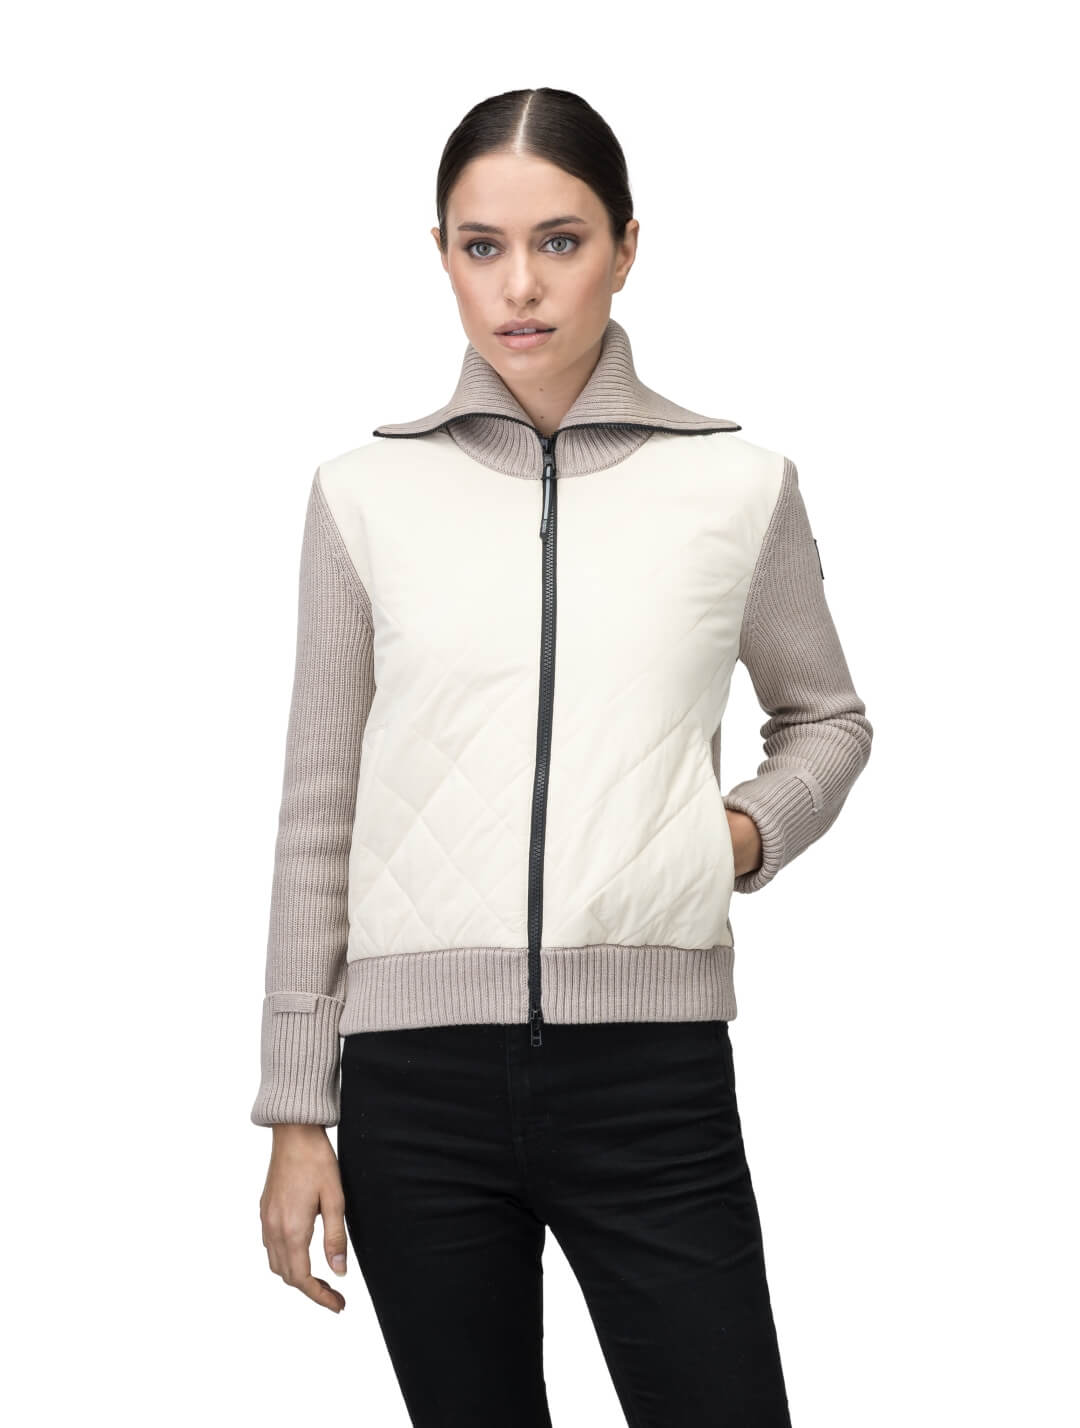 Ada Ladies Quilted Full Zip Sweater in hip length, PrimaLoft Gold Insulation Active+, Durable 4-Way Stretch Weave quilted torso, Merino wool knit collar, sleeves, back, and cuffs, two-way front zipper, and hidden waist pockets, in Wheat